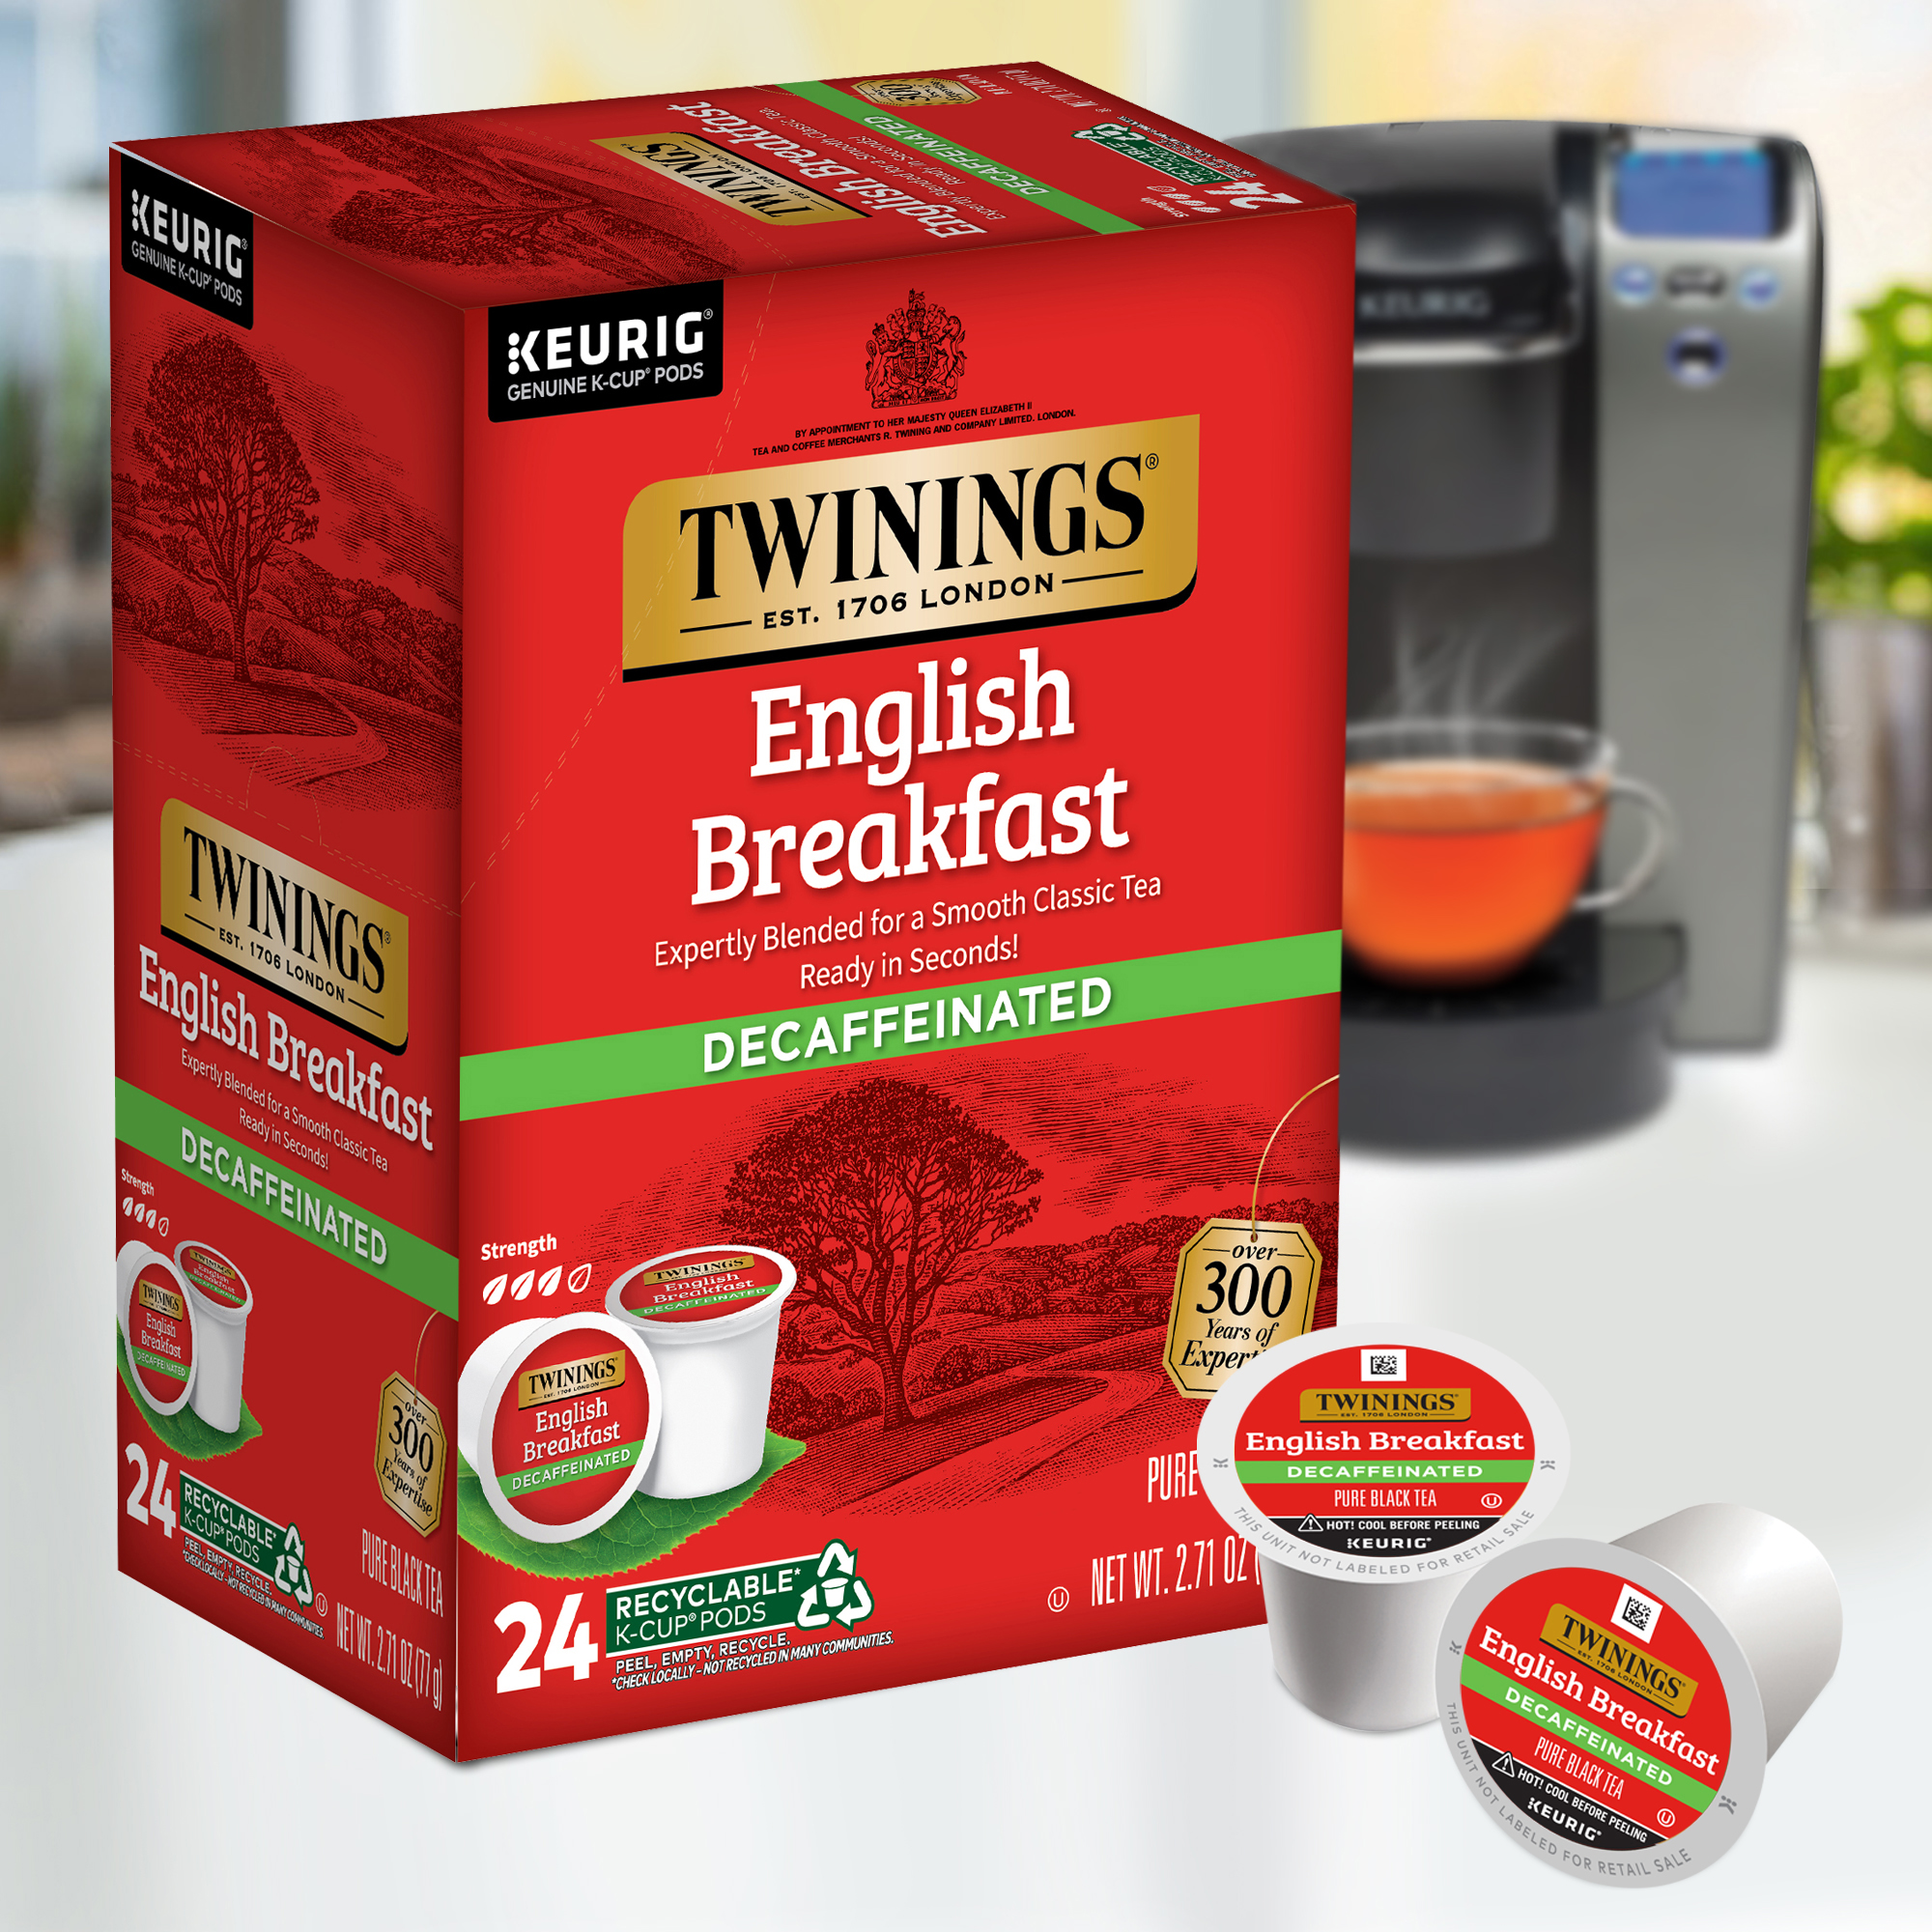 Twinings English Breakfast Decaffeinated K-Cup® Pods for Keurig, Pure Black Tea, 24 Count - image 4 of 7